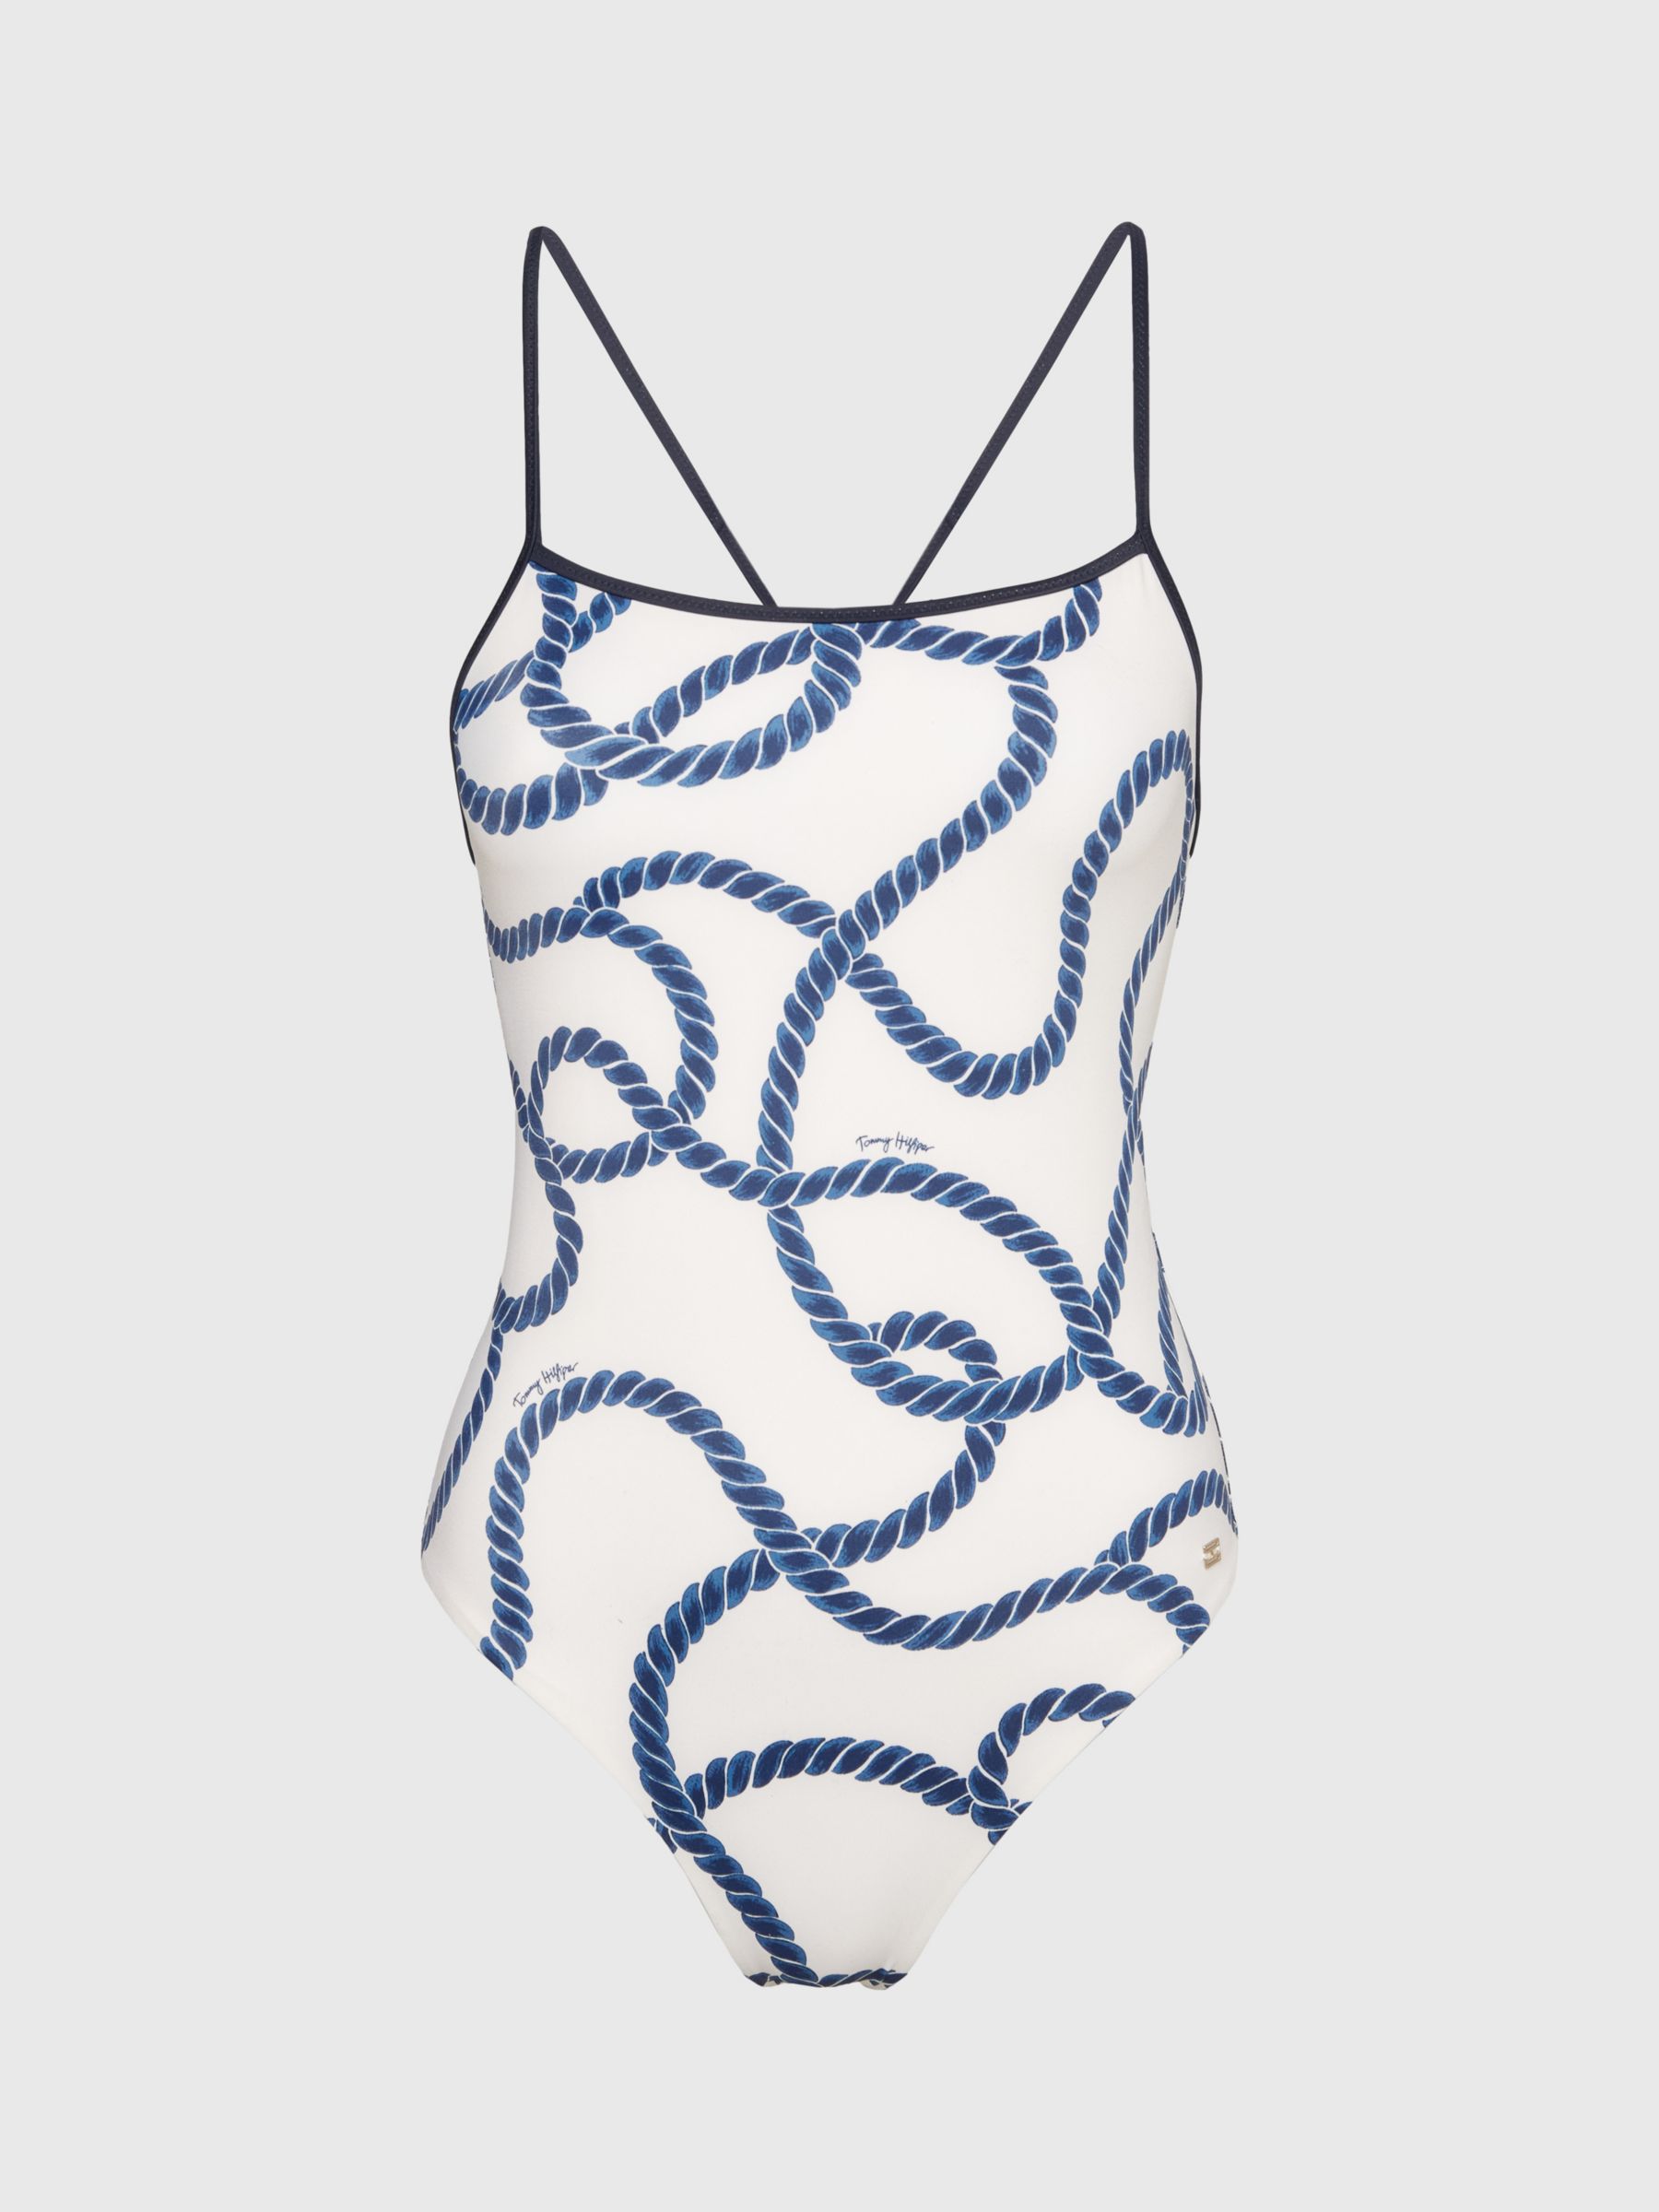 Tommy Hilfiger Rope Print Cross Back Swimsuit, White/Blue, M